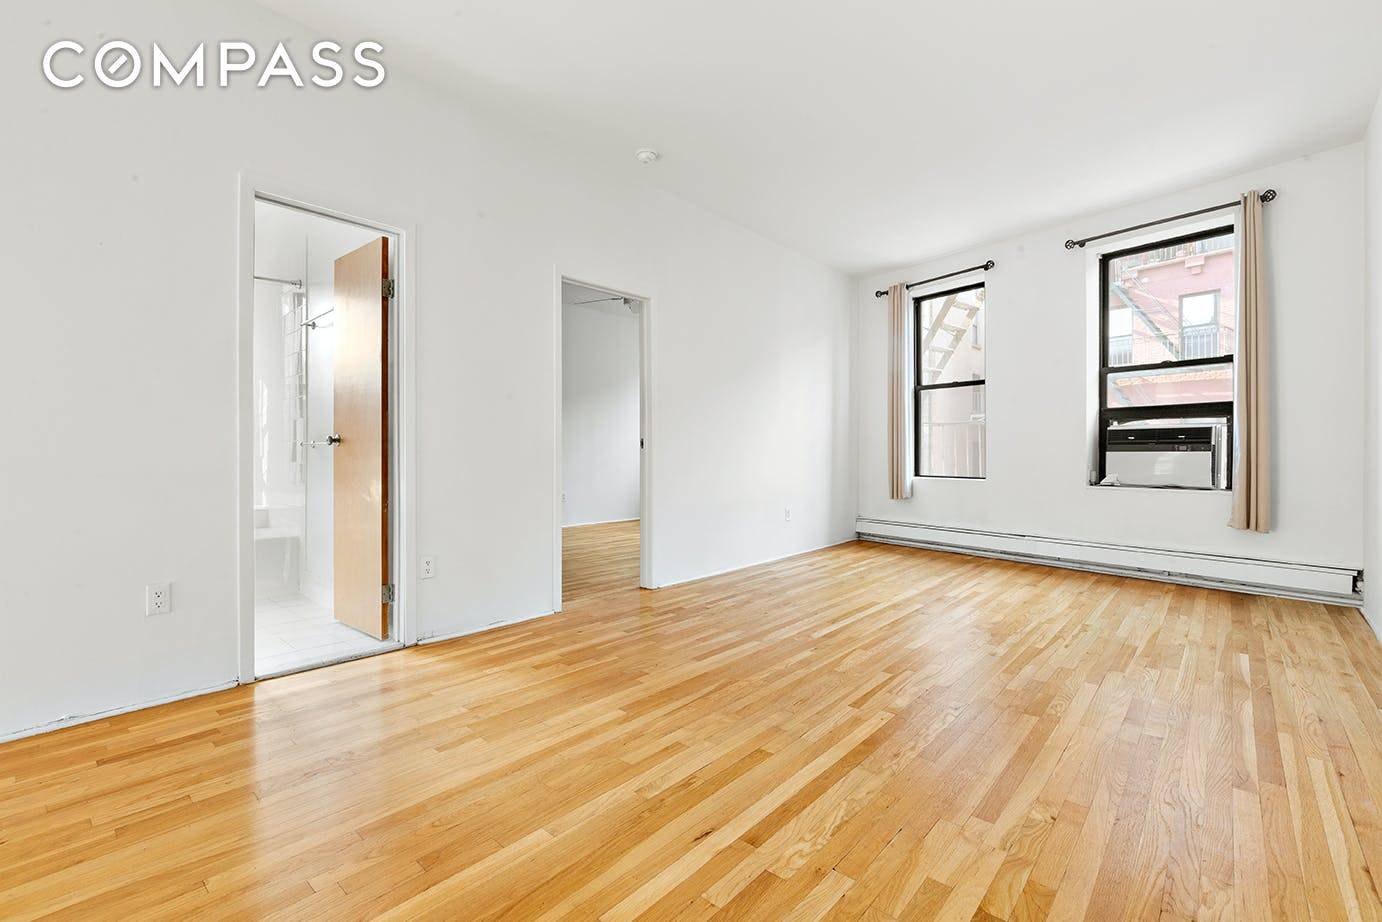 This is the perfect Nolita one bedroom on Prince Street between Bowery and Elizabeth.